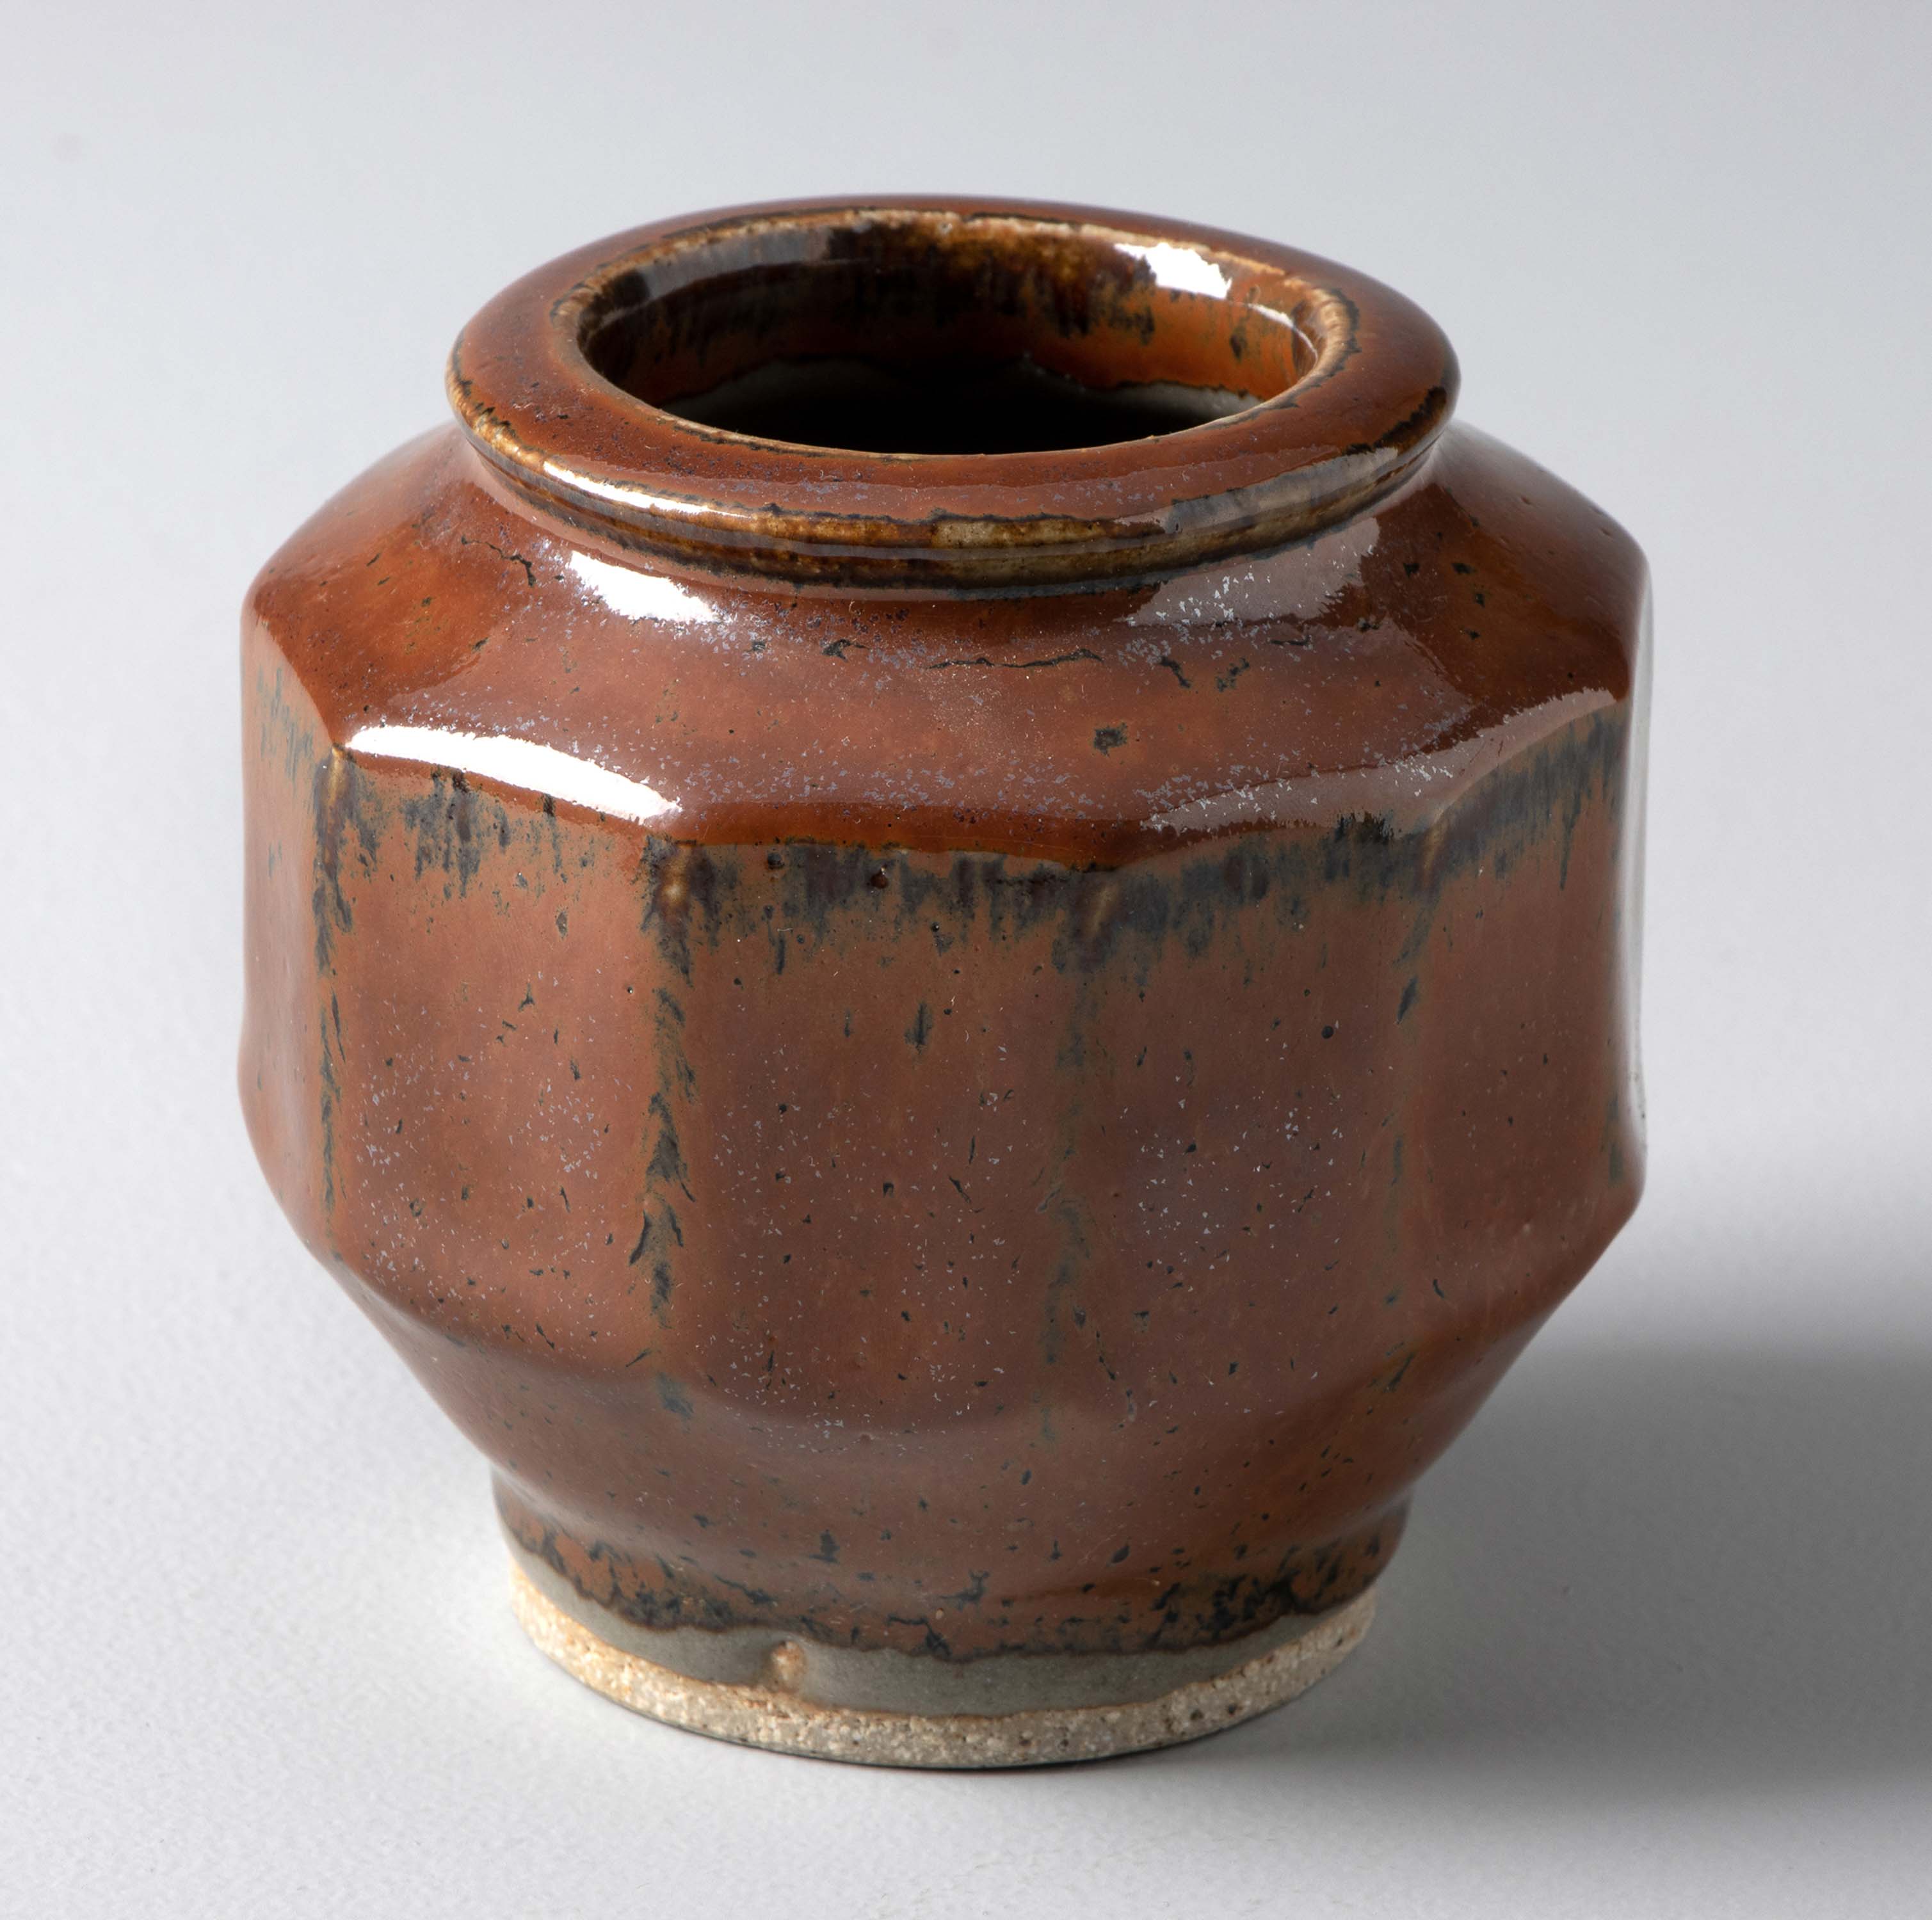 HYM RABINOWITZ (SOUTH AFRICAN 1920 - 2010): A SMALL VASE